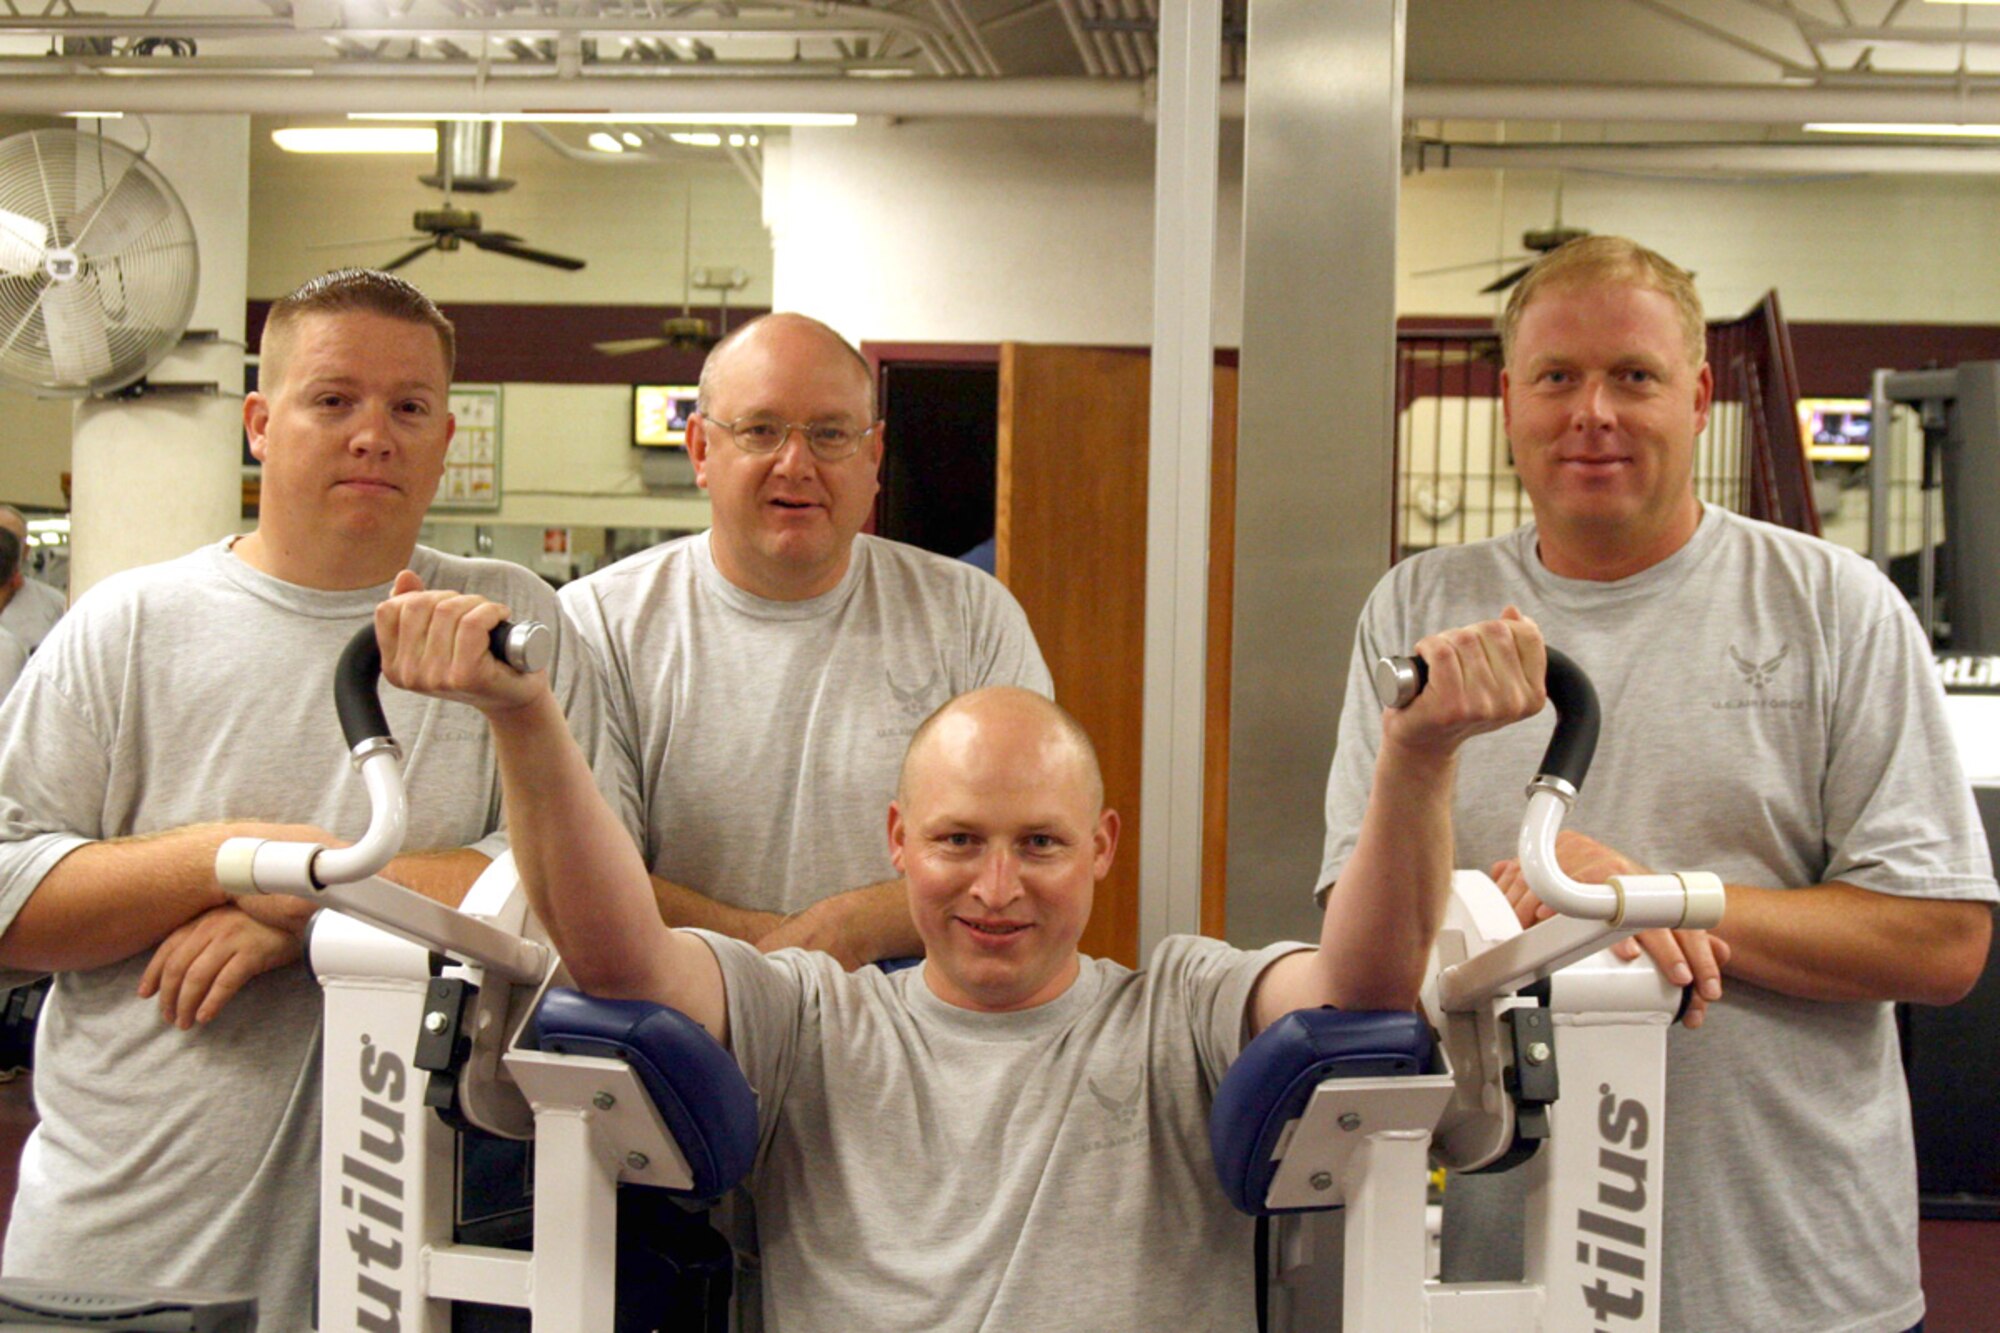 ‘Beef’ stays hot in Tinker Lean Challenge 
For the third week in a row, the Tinker Lean Challenge team winner is Prime Beef. Above, team members Senior Airman Christopher Coffman, Master Sgt. Larry Shenold, Staff Sgt. Jerry Harding and Tech. Sgt. Richard Klinski  workout at the Gerrity Fitness Center. Not pictured are Staff Sgt. Jeremy Heinz and Master Sgt. Thomas Klutz. The team combined to lose 15 pounds, shed 2.15 body mass index and earn 24,000 Fitlinxx points for a total of 24,017.15 points. (Air Force photos by Becky Pillifant)
